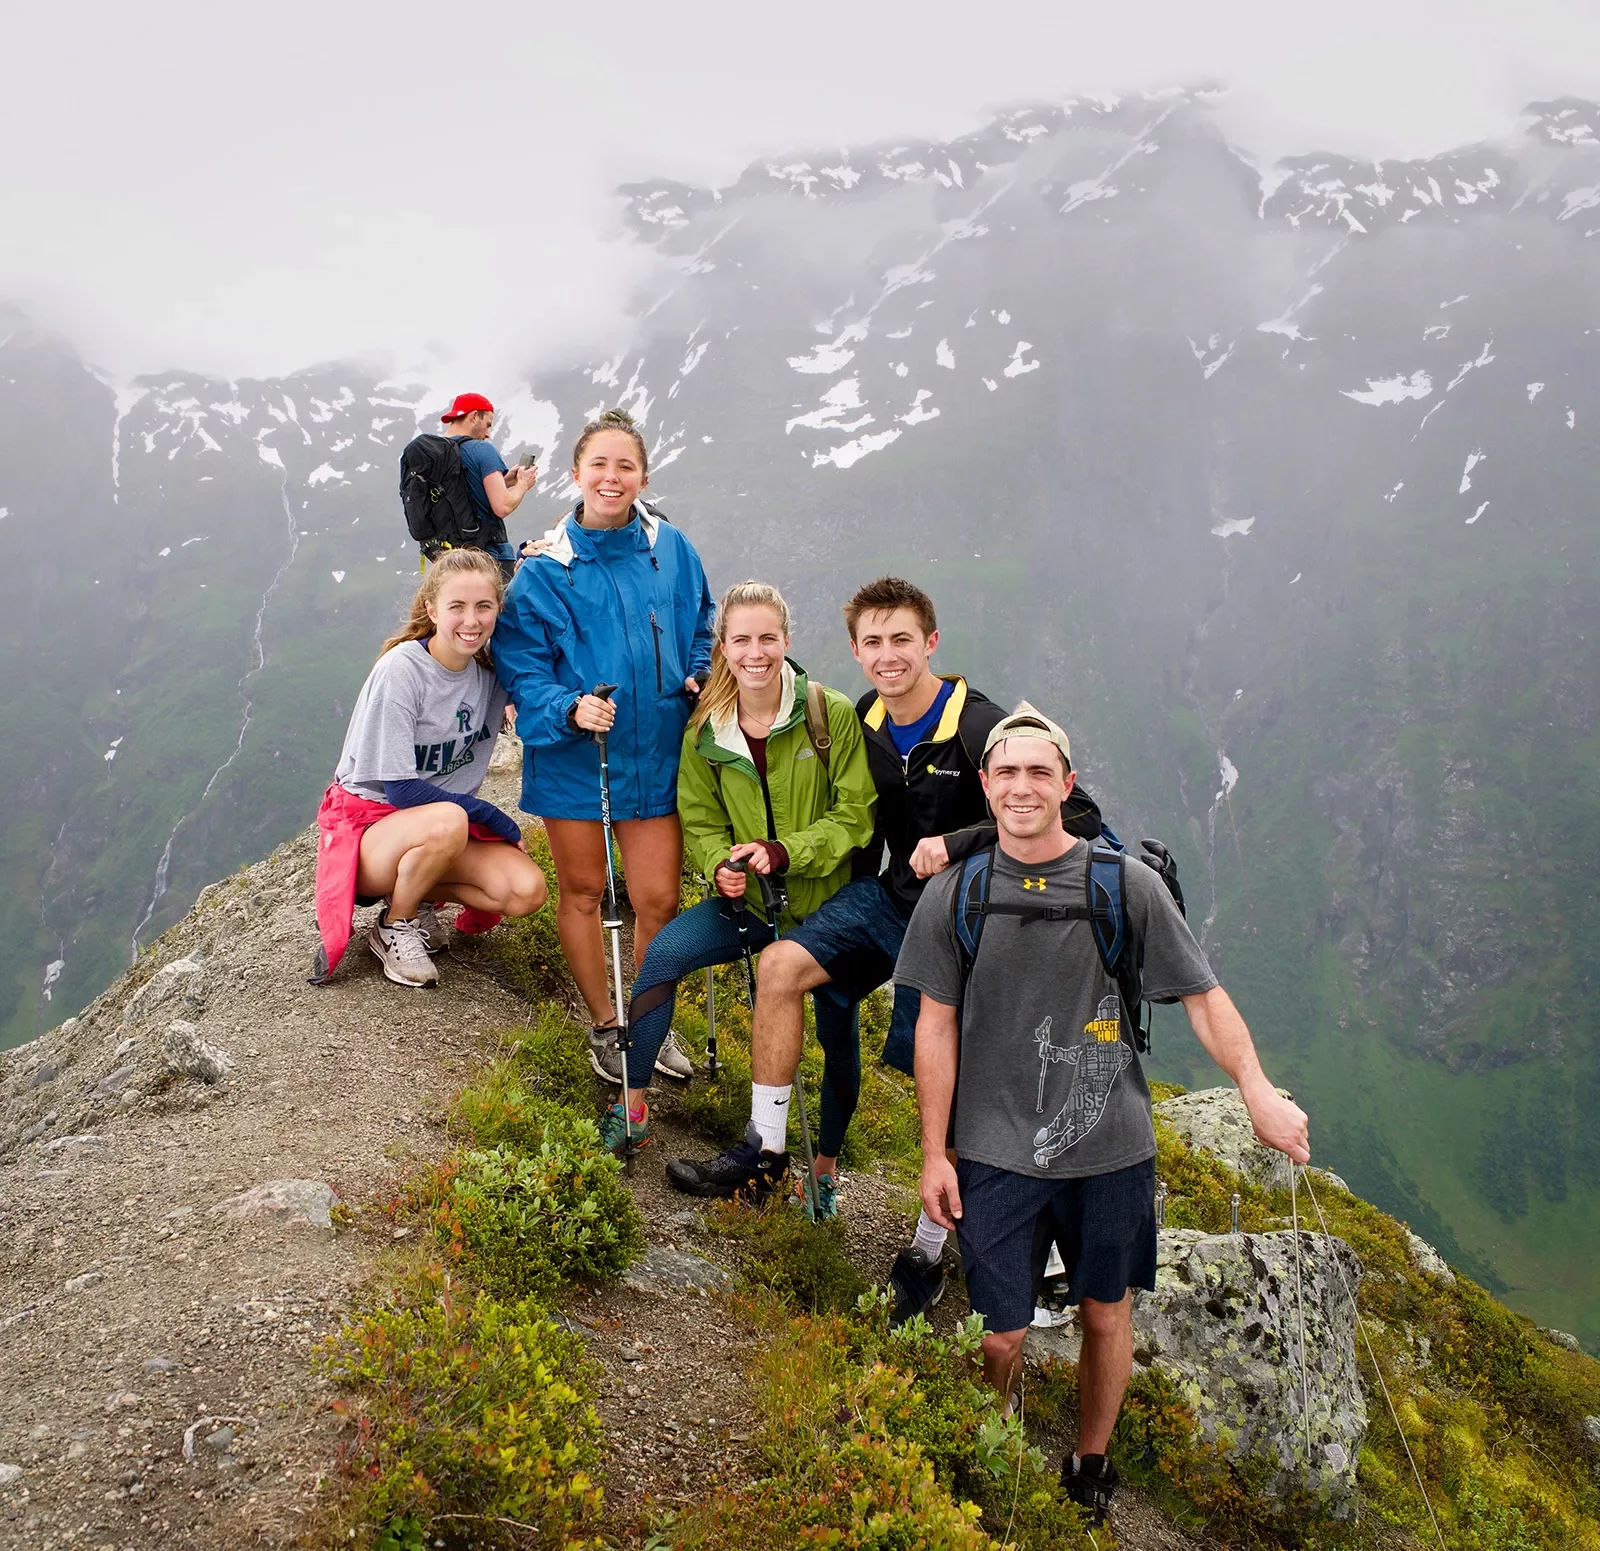 Group of hikers resting at the summit of a foggy mountain in Norway